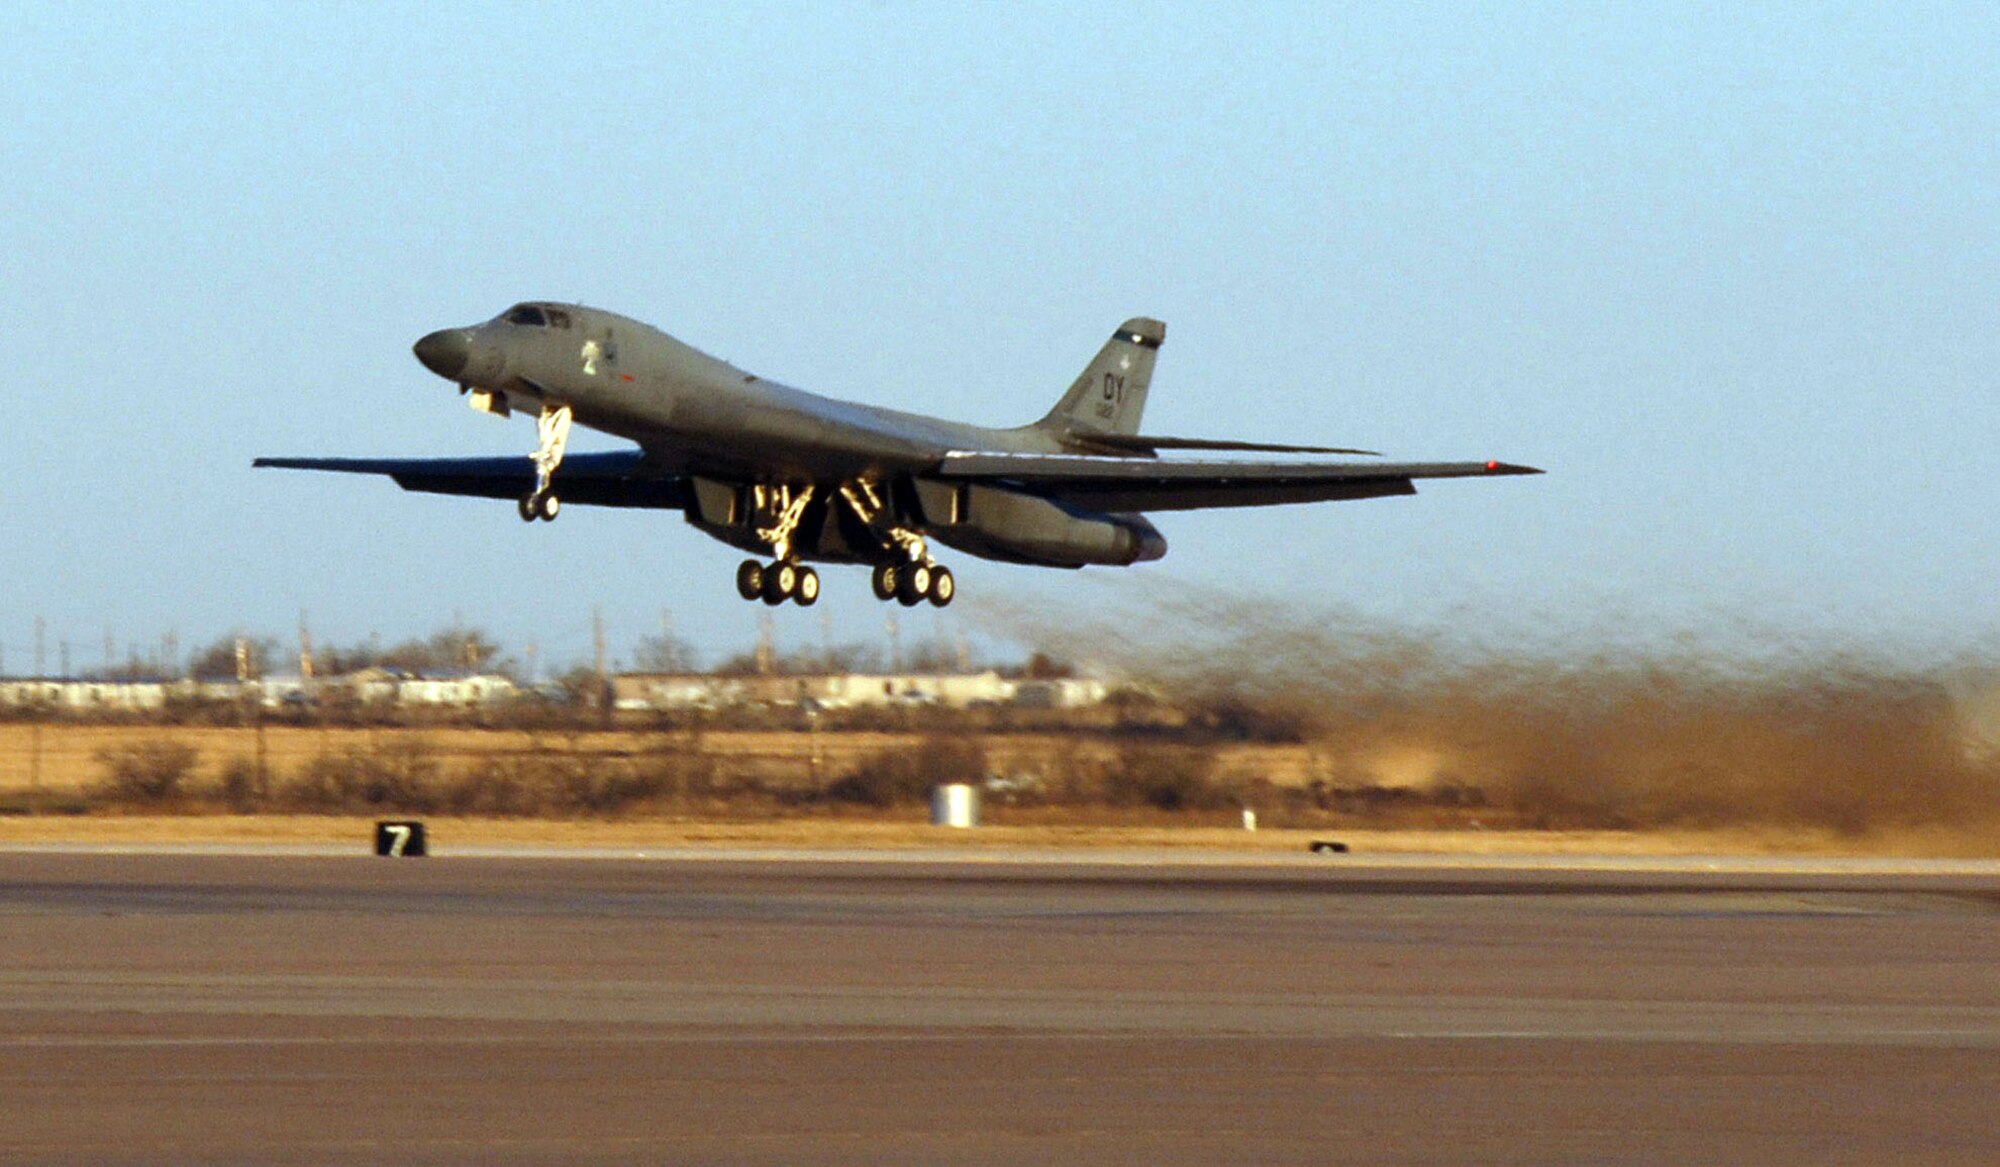 DYESS AIR FORCE BASE, Texas (AFPN) -- A B-1B Lancer takes off on a simulated deployment during the base’s operational readiness exercise. The aircraft is with the 9th Bomb Squadron here known as the “Bats.” The exercise prepares Airmen for the upcoming operational readiness inspection and wartime deployments. (U.S. Air Force photo by Staff Sgt. Araceli Alarcon)

